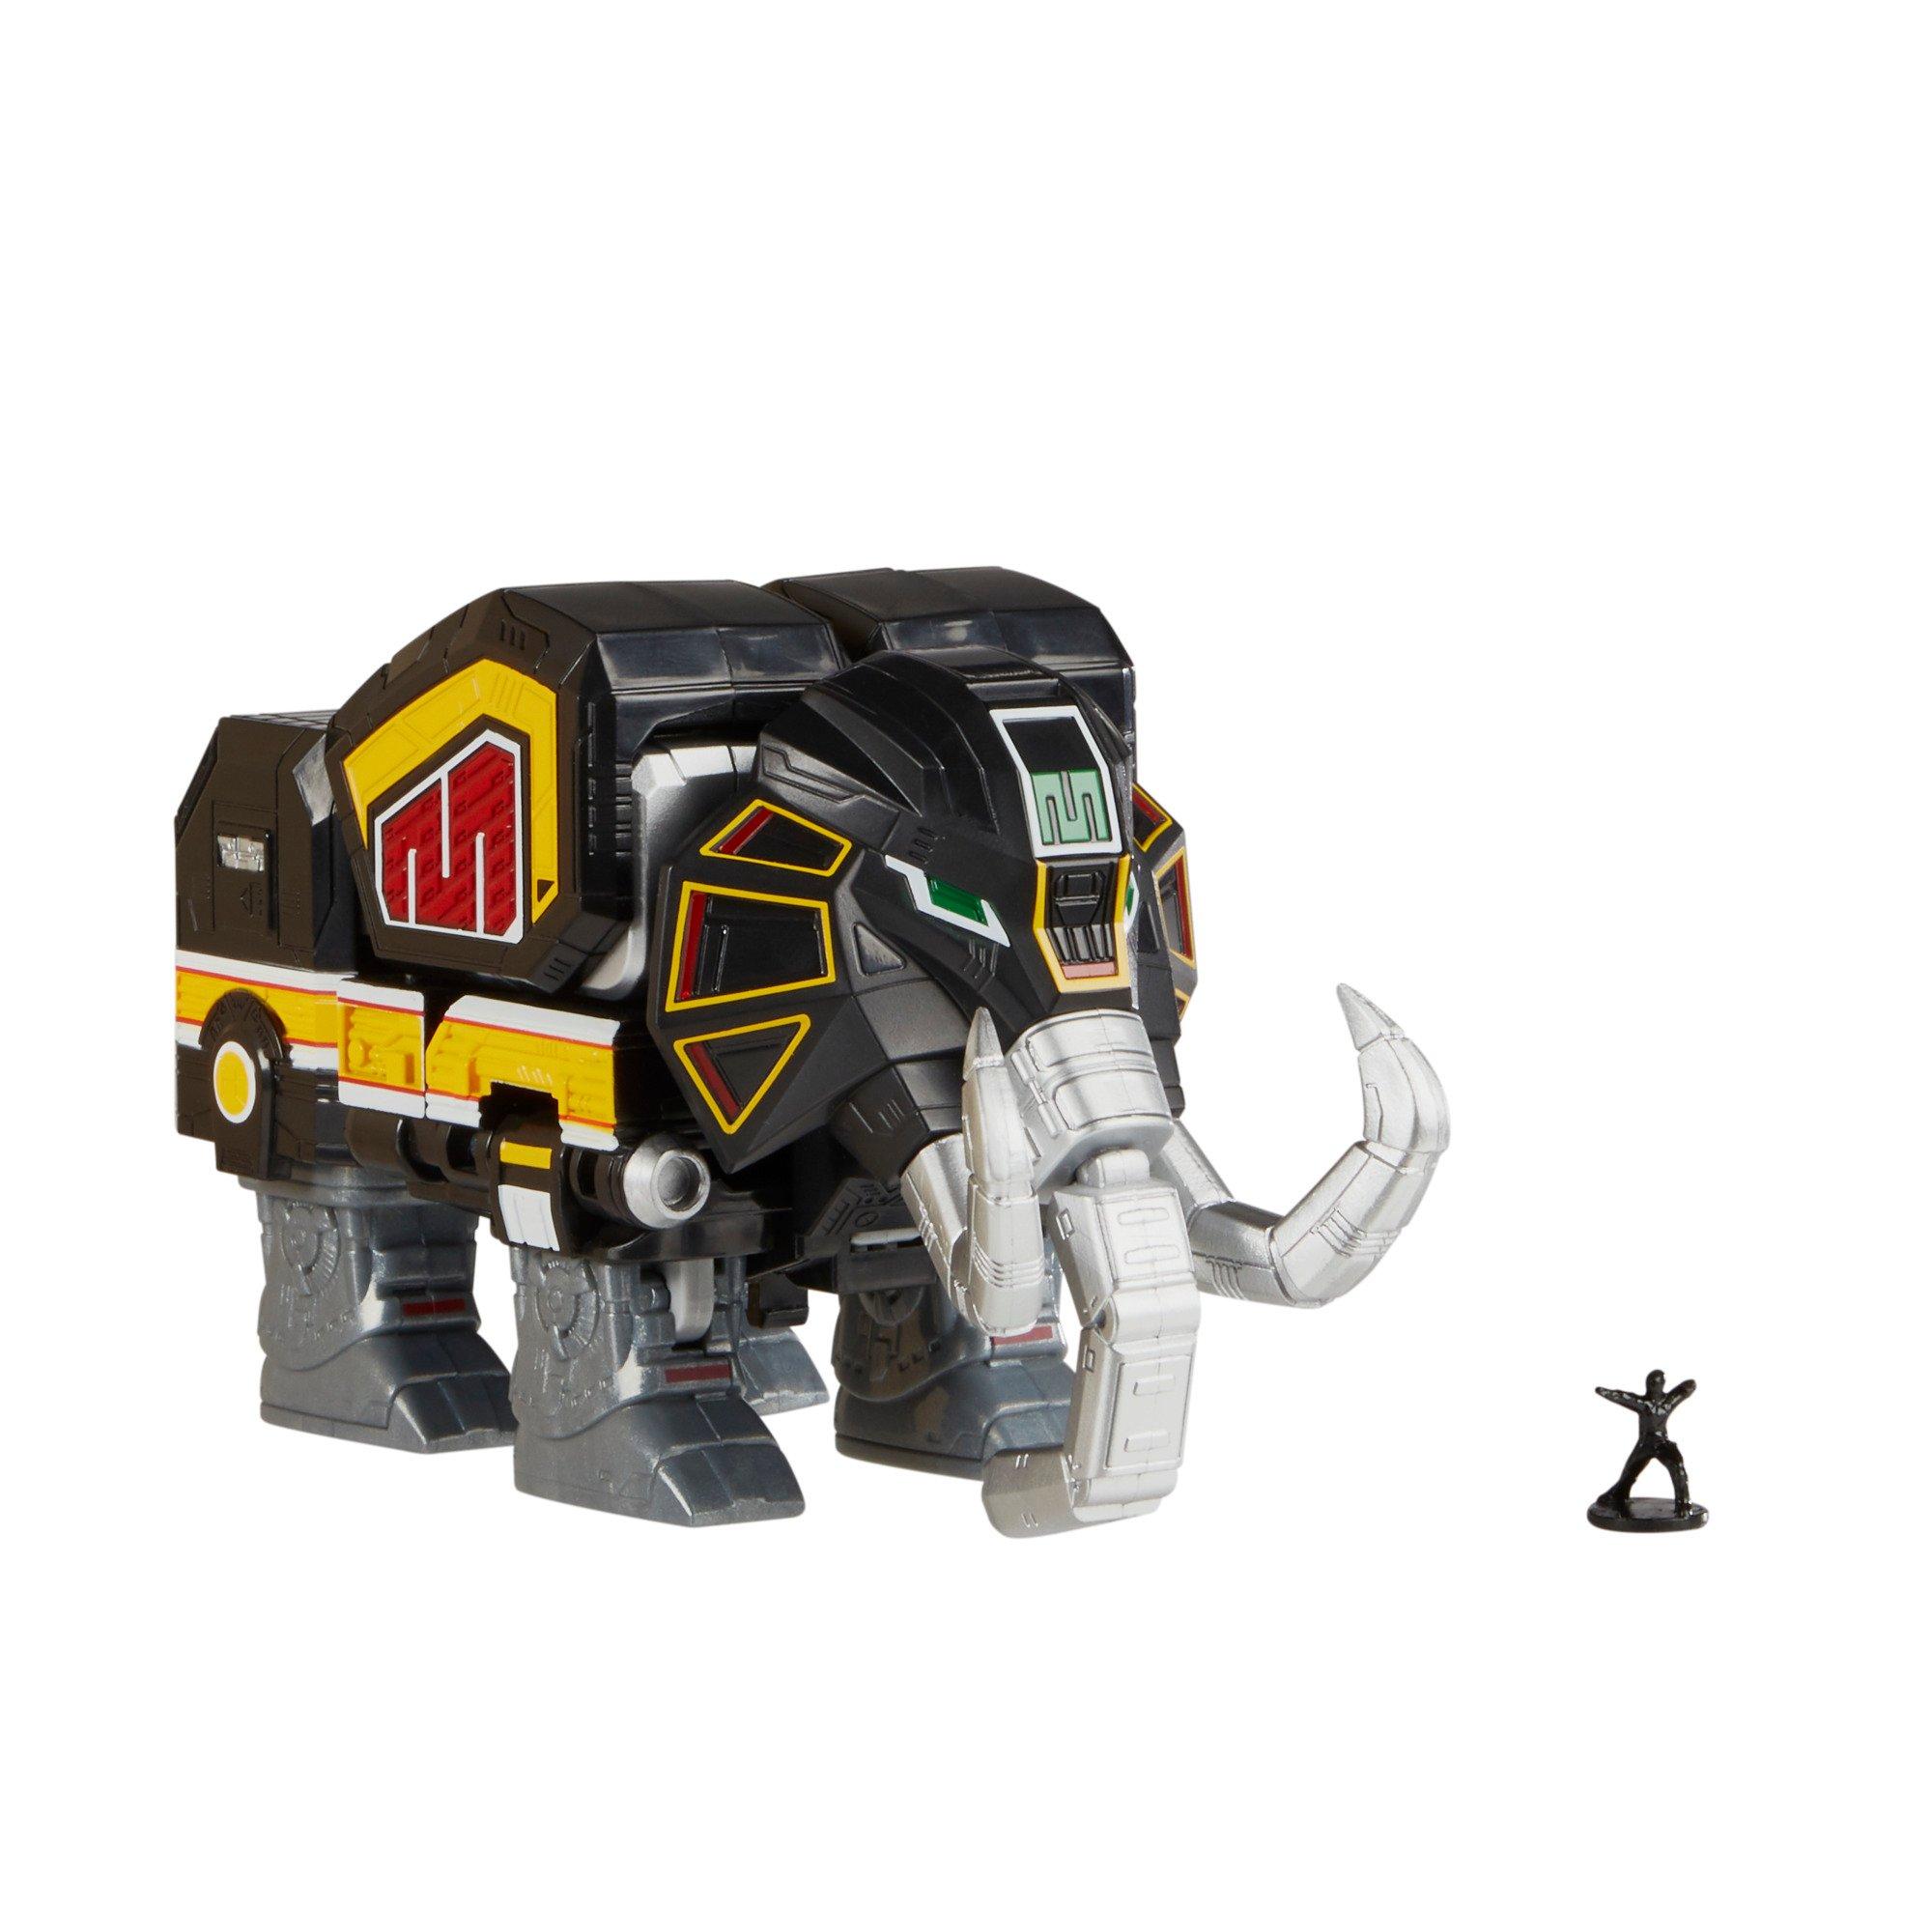 list item 6 of 16 Hasbro Mighty Morphin Power Rangers Zord Ascension Project Dino Megazord Action Figure